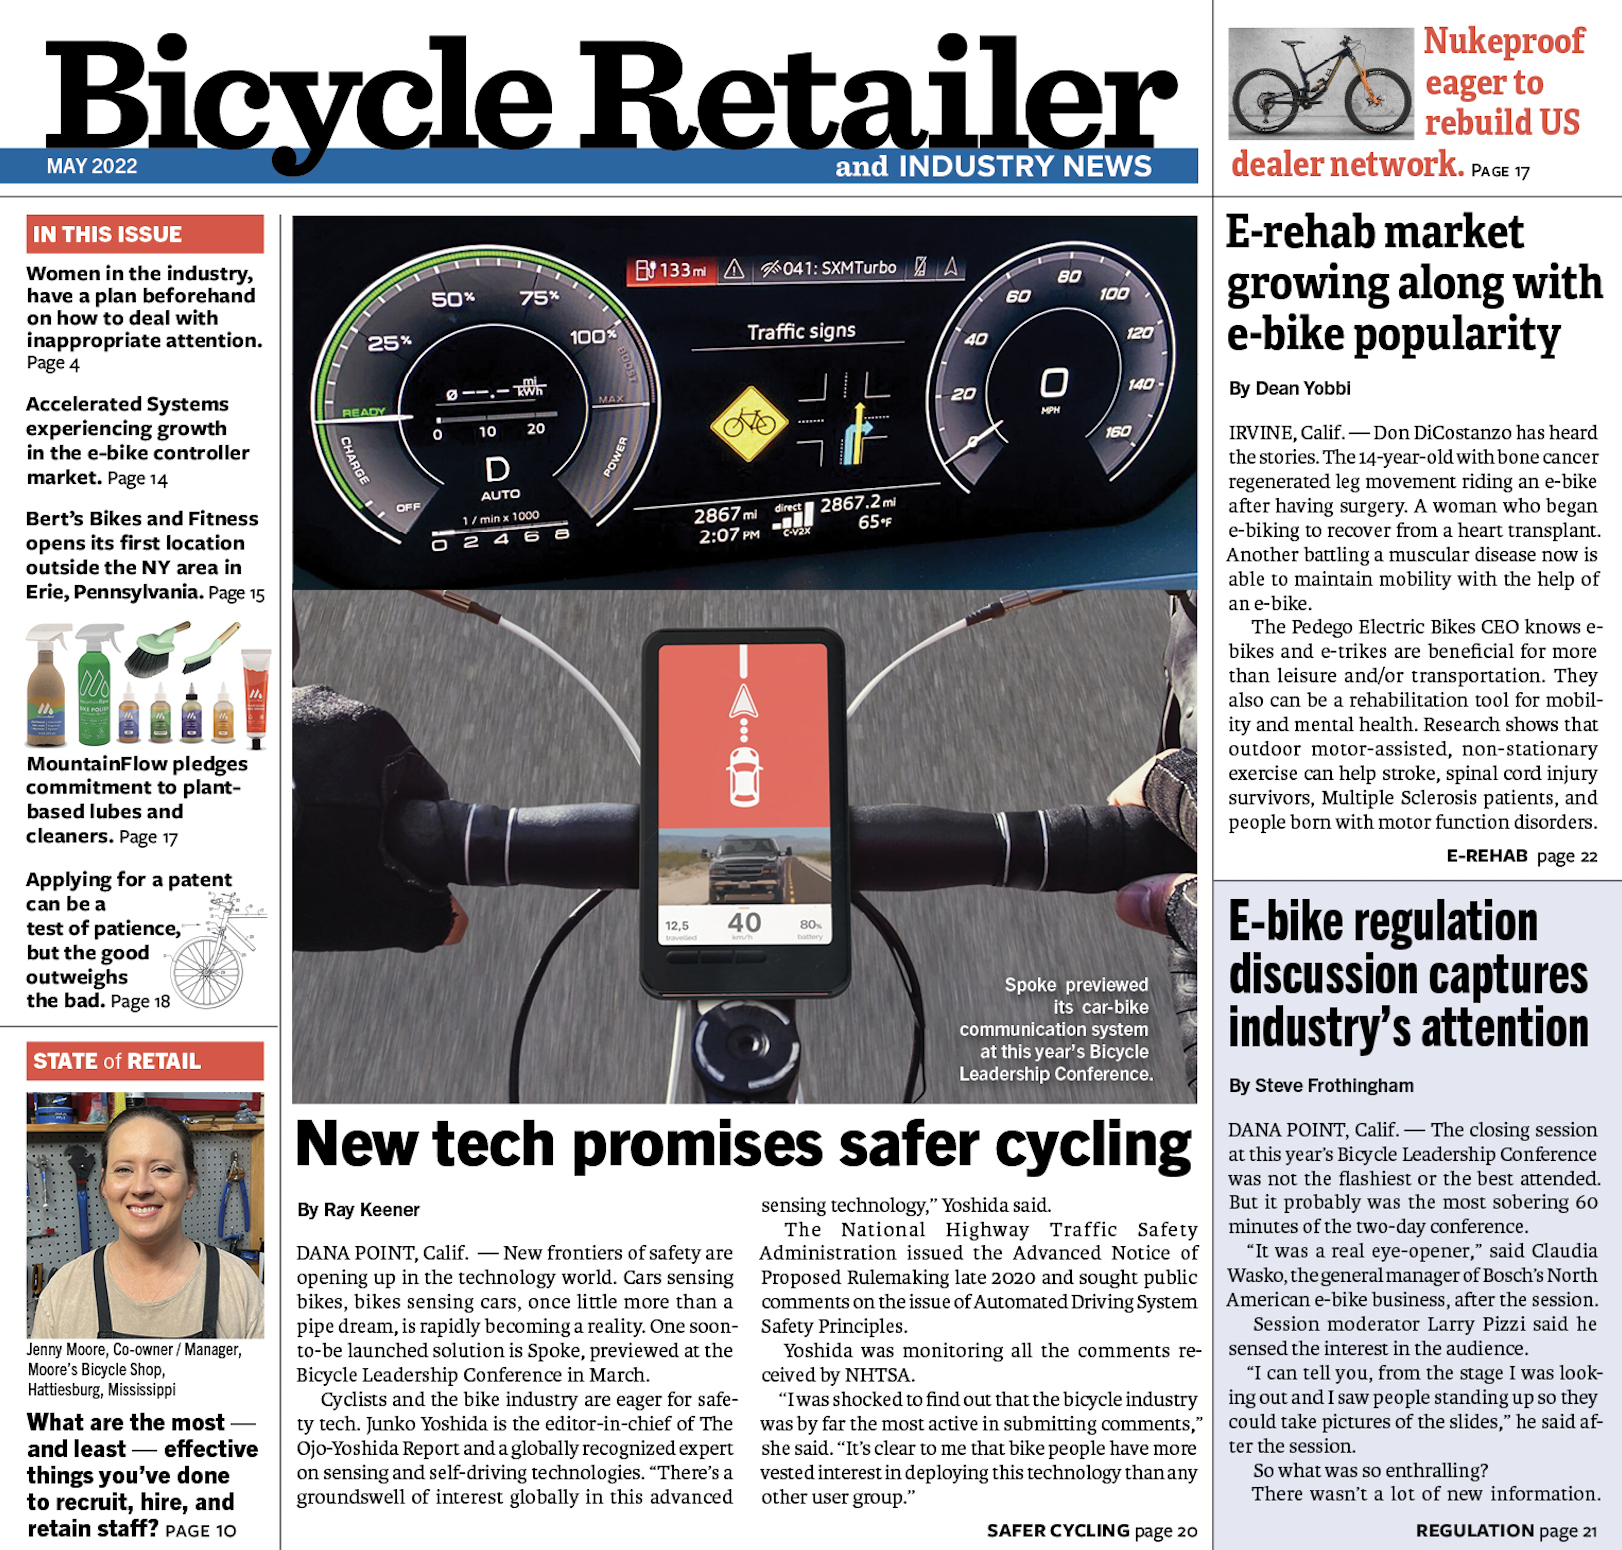 A version of this article originally appeared in the May issue of Bicycle Retailer & Industry News.